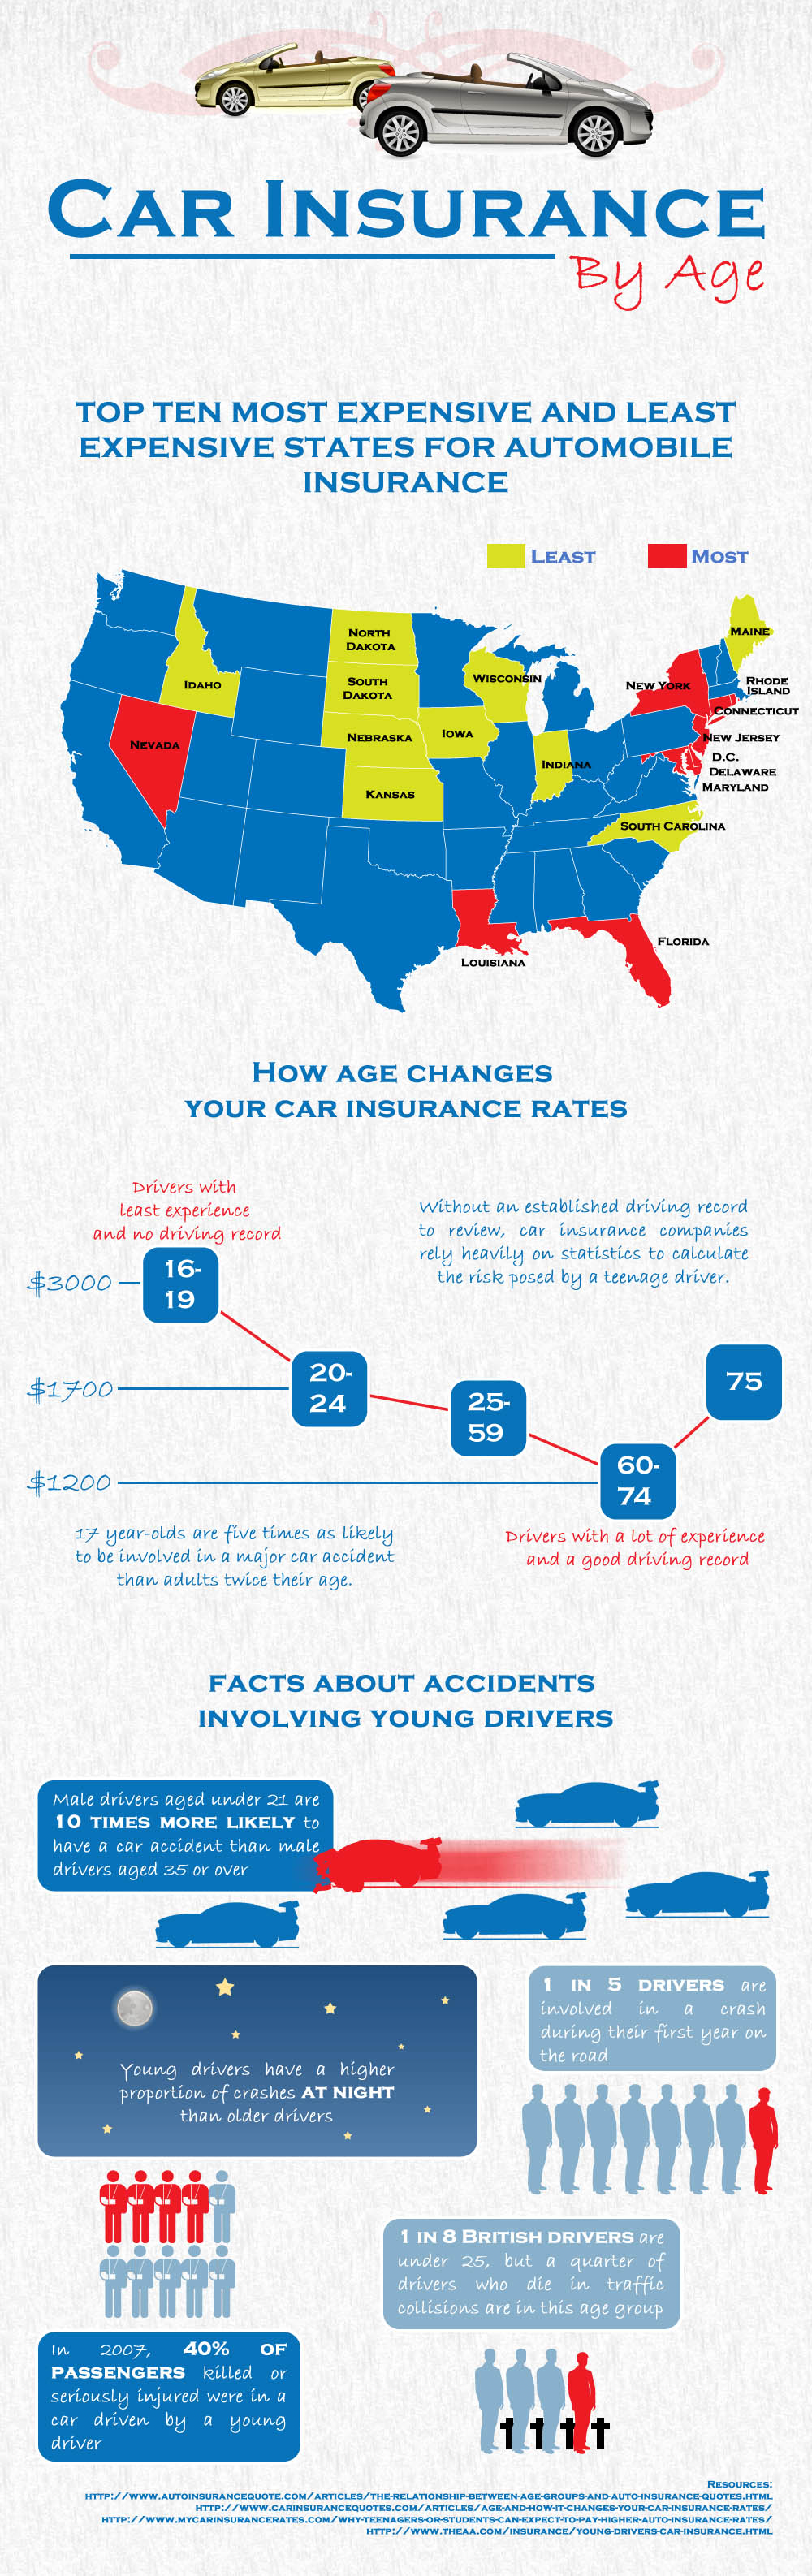 Car Insurance By Age in the US  iNFOGRAPHiCs MANiA